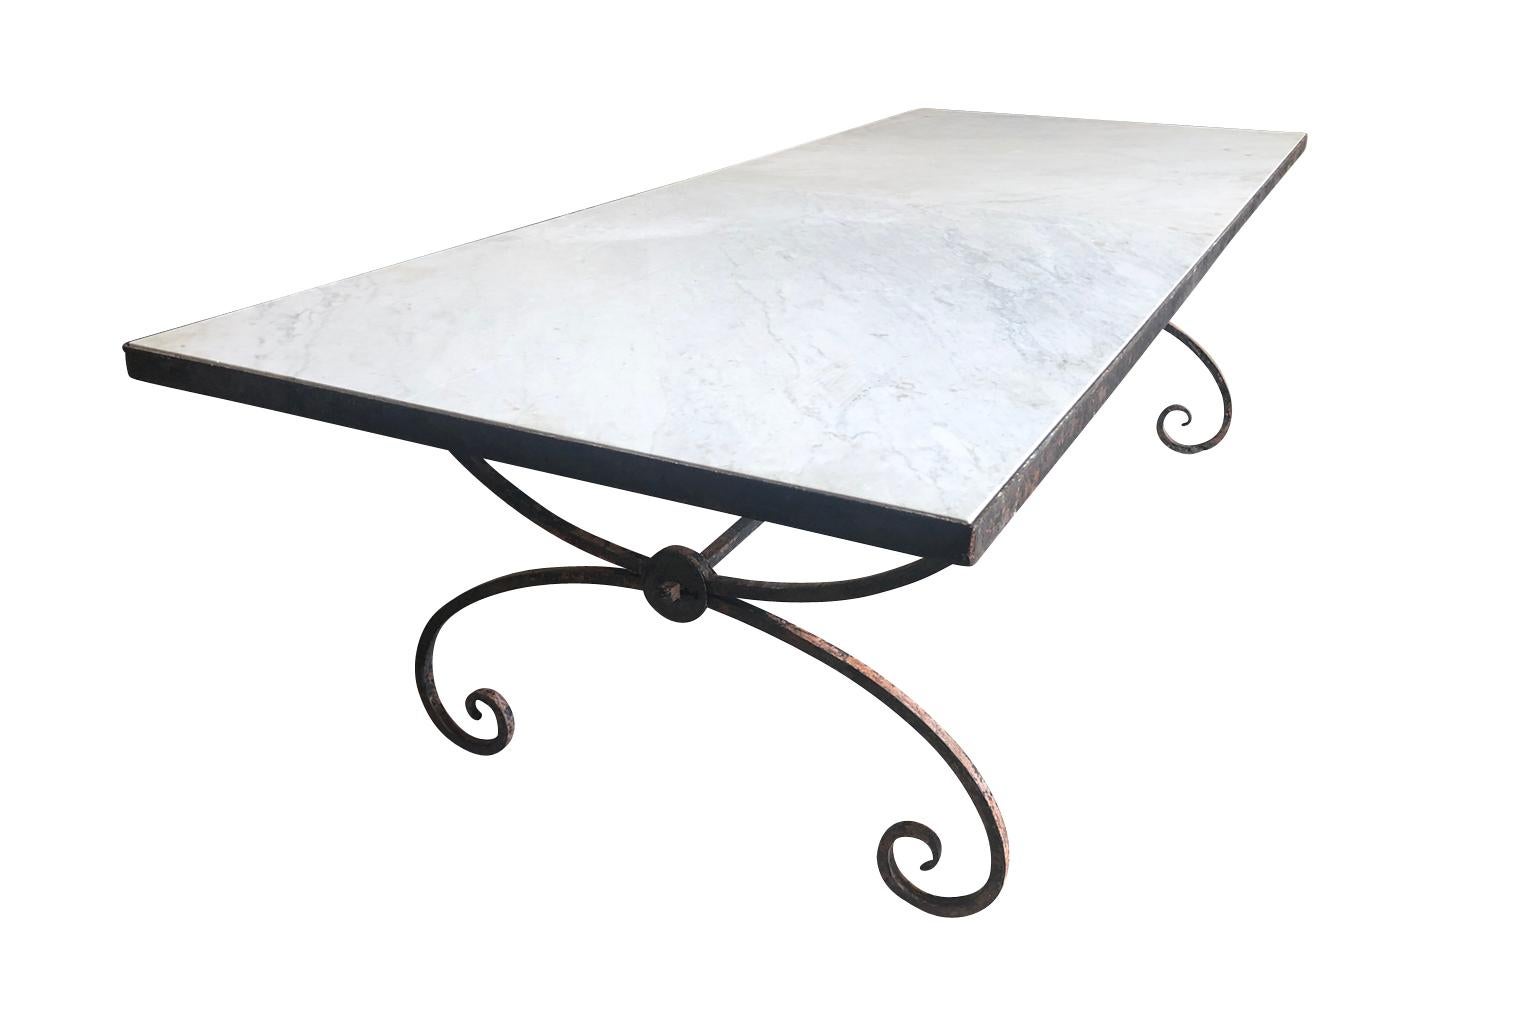 A sensational early 20th century garden dining table from the South of France. Very soundly constructed from beautifully patina'd painted iron with a marble top. The marble is in 2 pieces. Perfect for large family gatherings indoors or out.